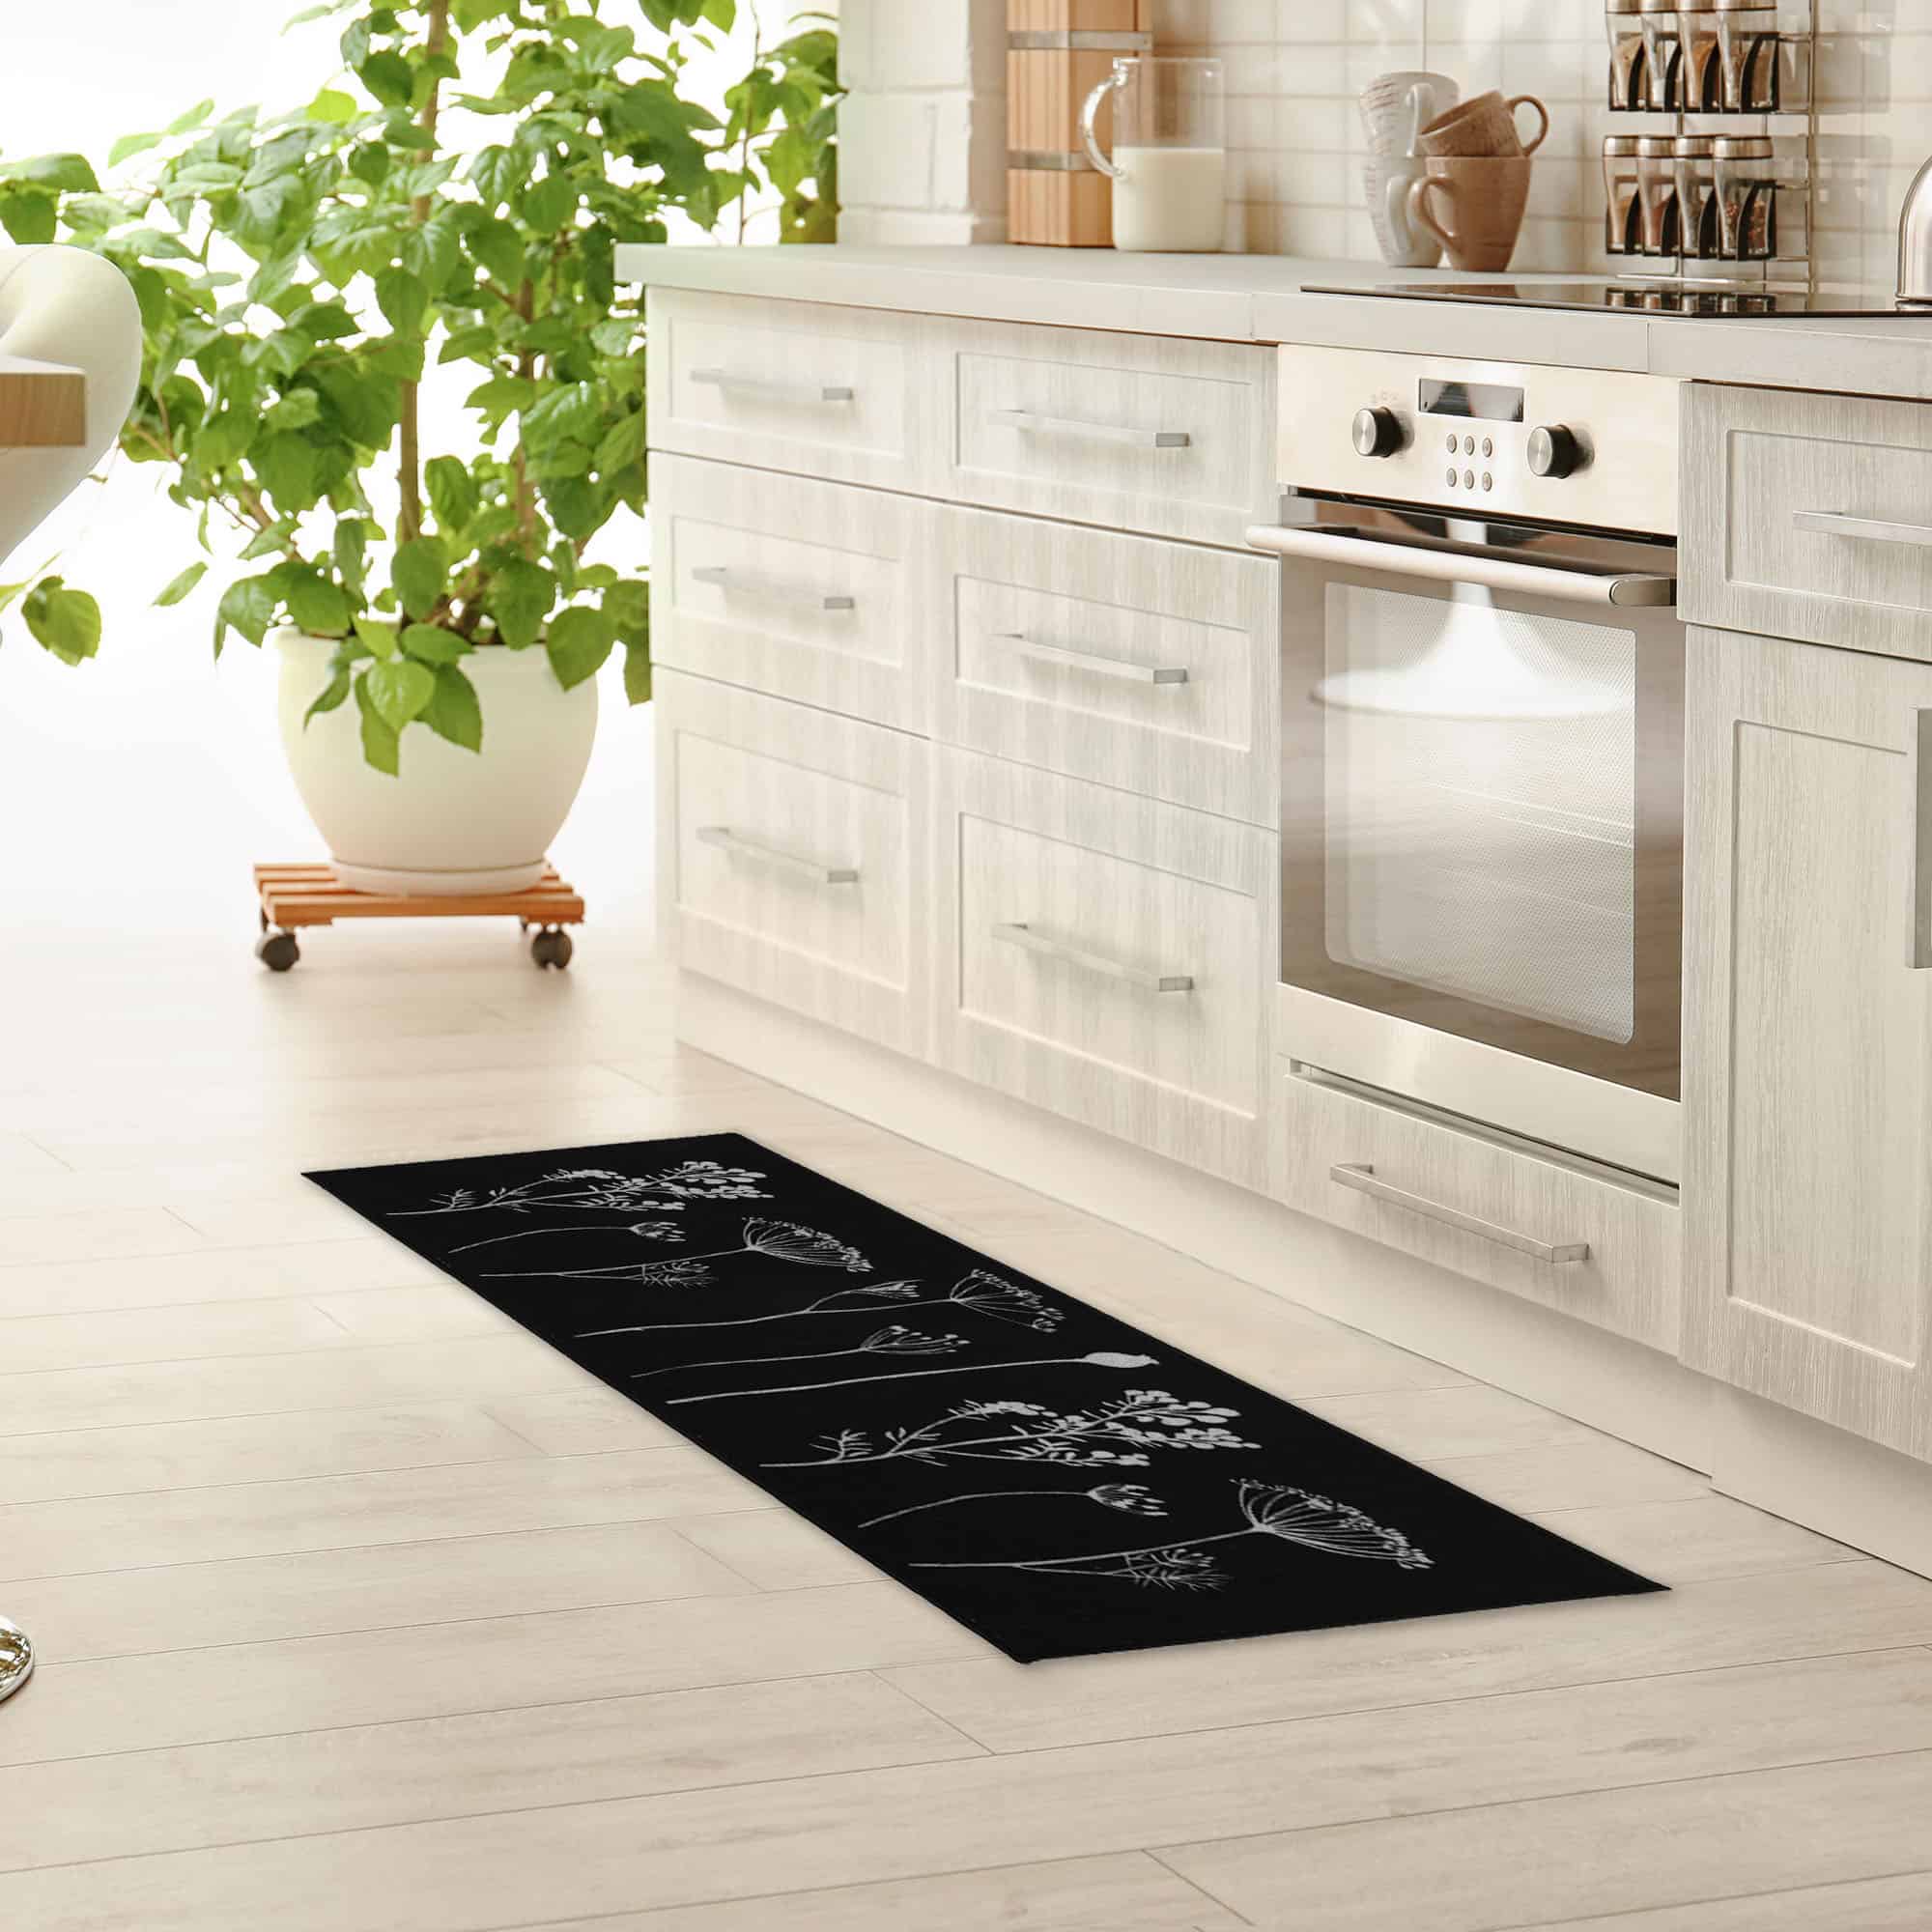 an elegant kitchen with a long runner rug in black with filed flowers design